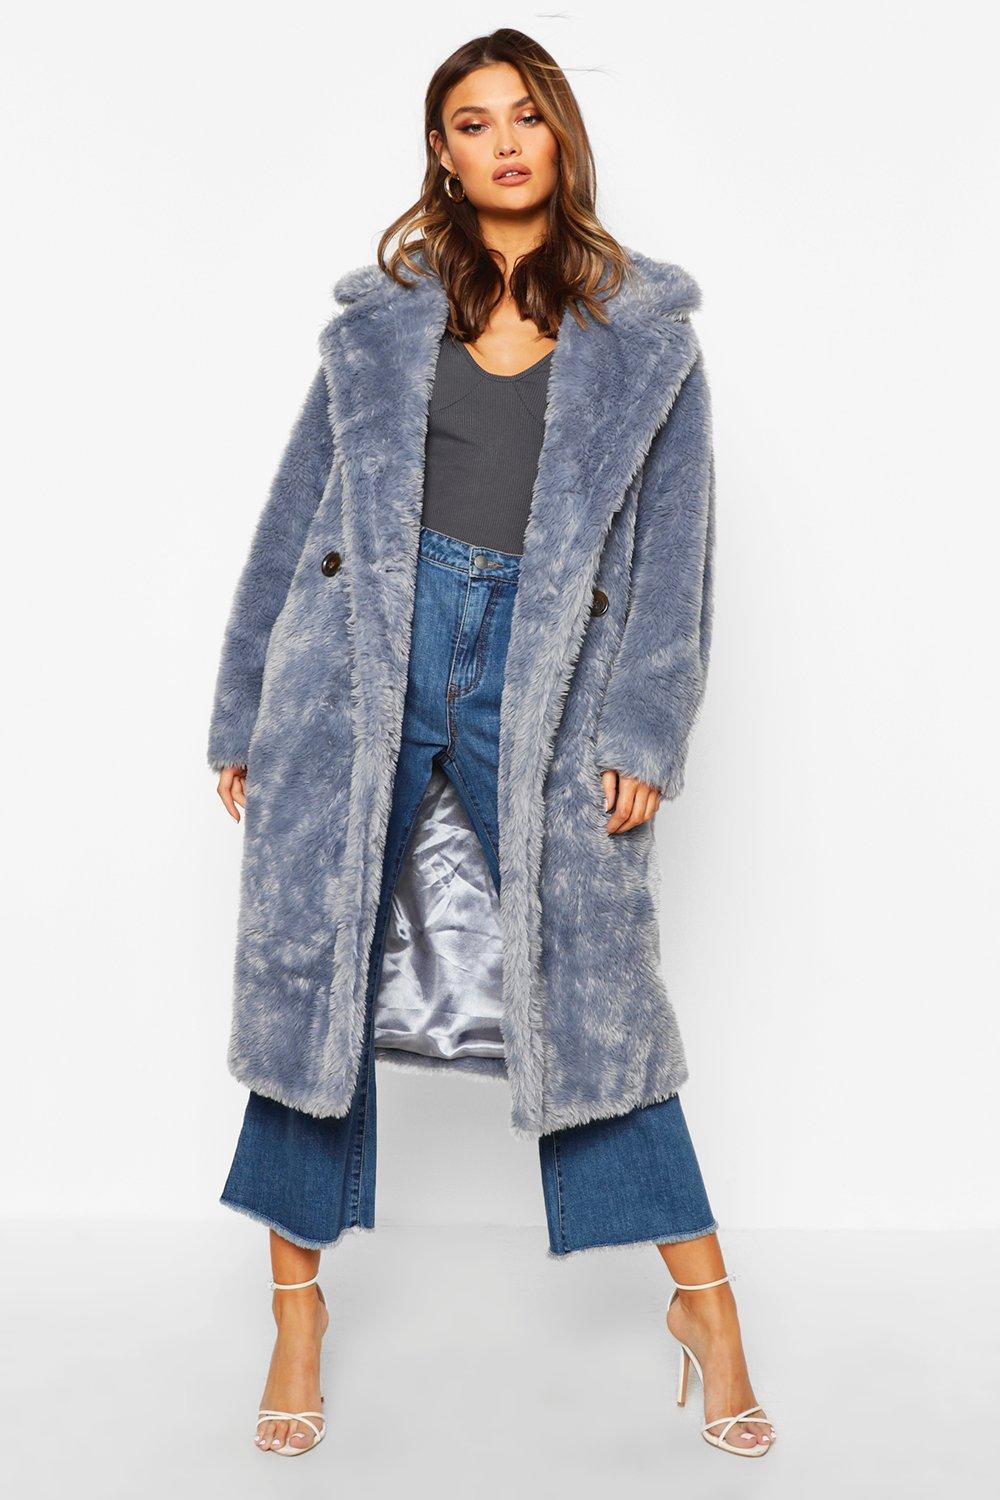 Image result for Oversized Teddy Faux Fur Coat https://www.boohoo.com/oversized-teddy-faux-fur-coat/FZZ91757.html Product code: FZZ91757